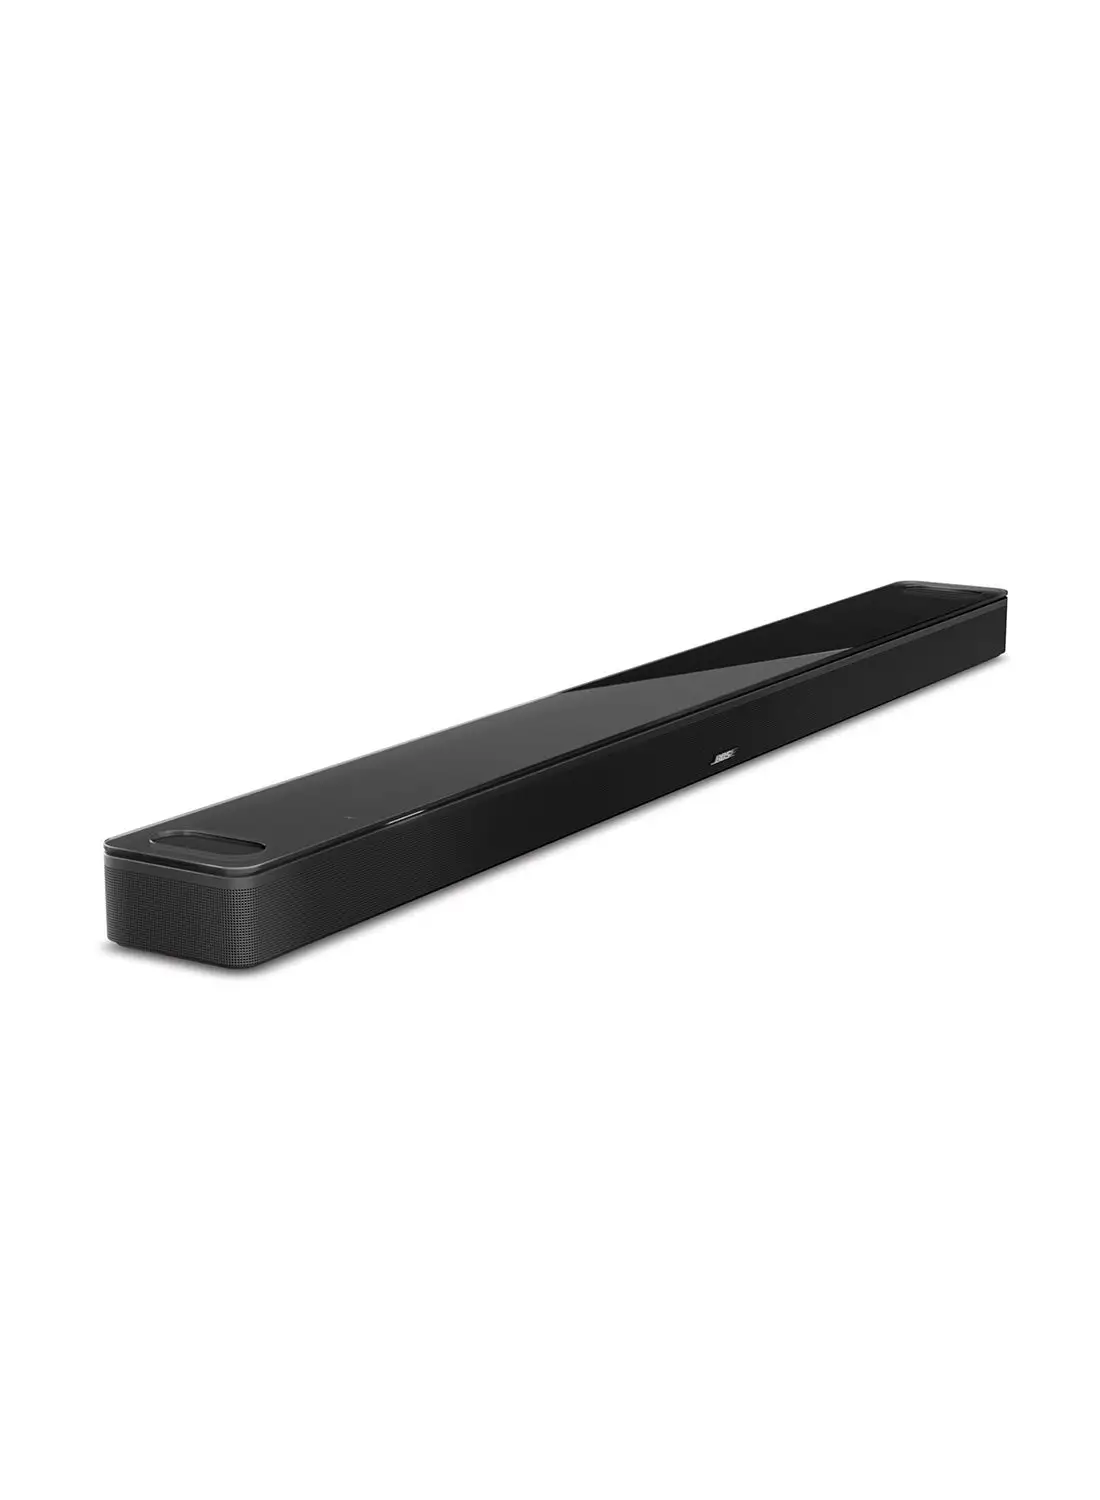 BOSE Smart Ultra Soundbar With Dolby Atmos Plus Alexa And Google Voice Control Surround Sound System for TV 882963-4100 Black